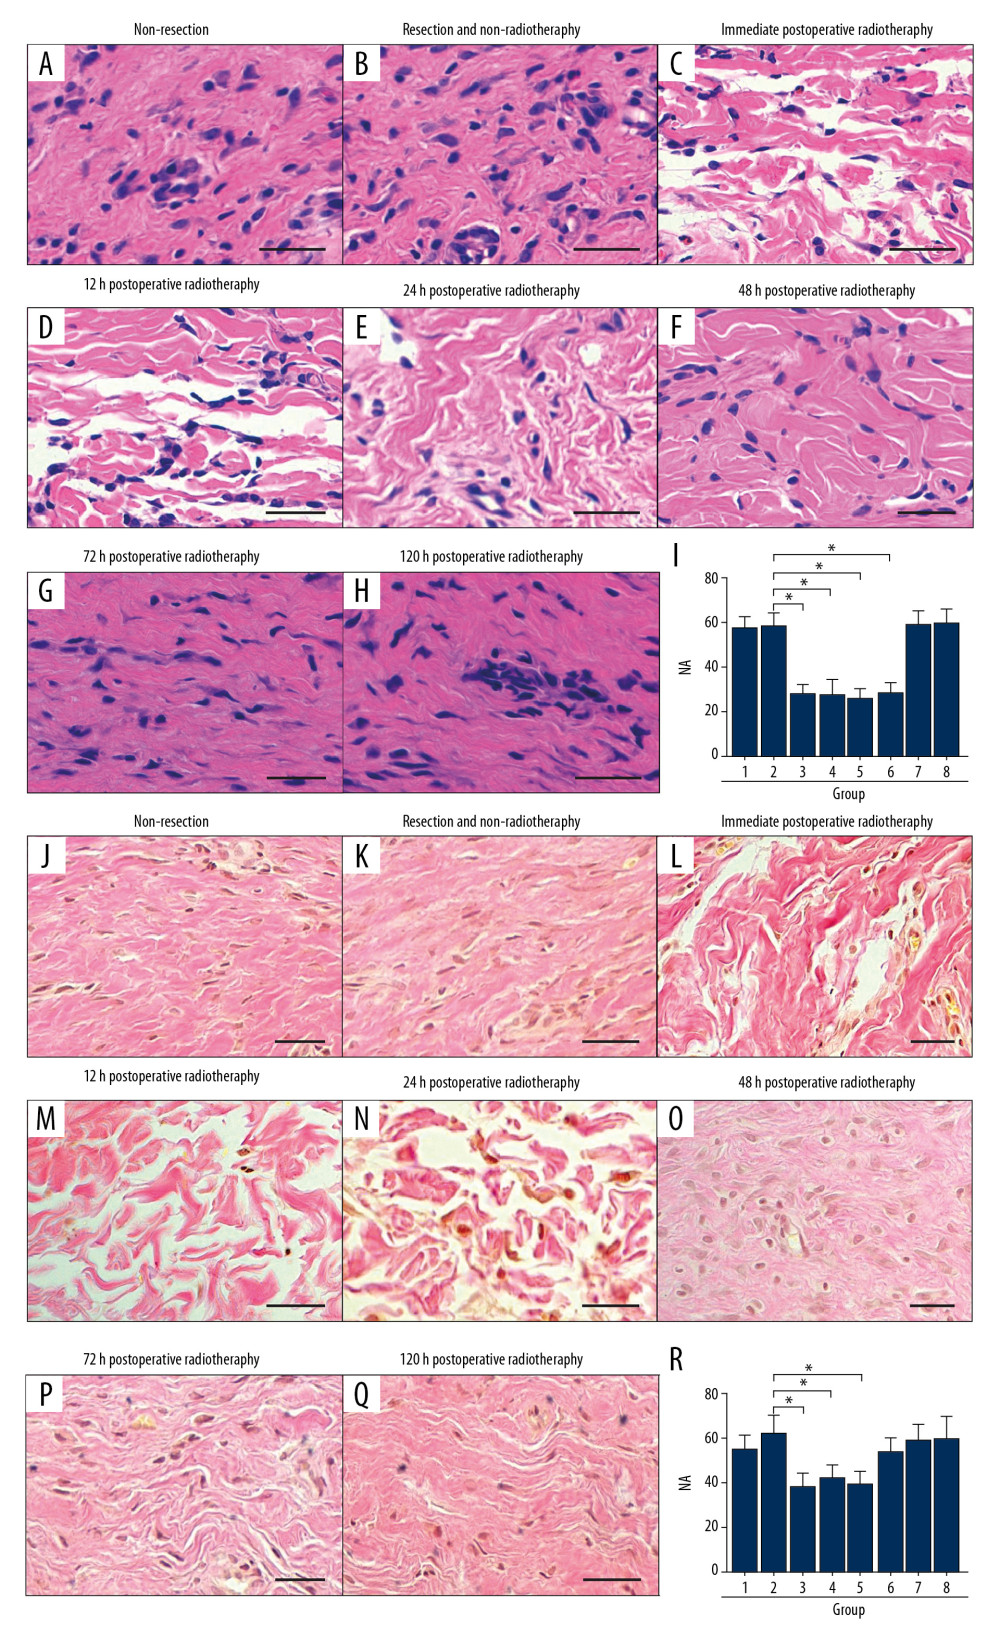 (A–R) In the rabbit model, early radiotherapy significantly reduced the number of fibroblasts in hypertrophic scar. (A, B) The non-resection group and the resection and non-radiotherapy group showed a large number of fibroblasts in the hypertrophic scar. (C–F) In the early postoperative radiotherapy groups, fibroblasts were significantly reduced. (G, H) The late postoperative radiotherapy groups showed a large number of fibroblasts. (I) The quantification of fibroblast numerical area density (NA). (J, K) In the non-resection group and the resection and non-radiotherapy group, a large number of dense collagen fibers can be seen. (O–Q) Collagen fibers were denser in the late postoperative radiotherapy groups than in the early postoperative radiotherapy groups, except the 48-hour postoperative radiotherapy group. (R) The quantification of collagen fiber area density (AA). Scale bar=50 μm.